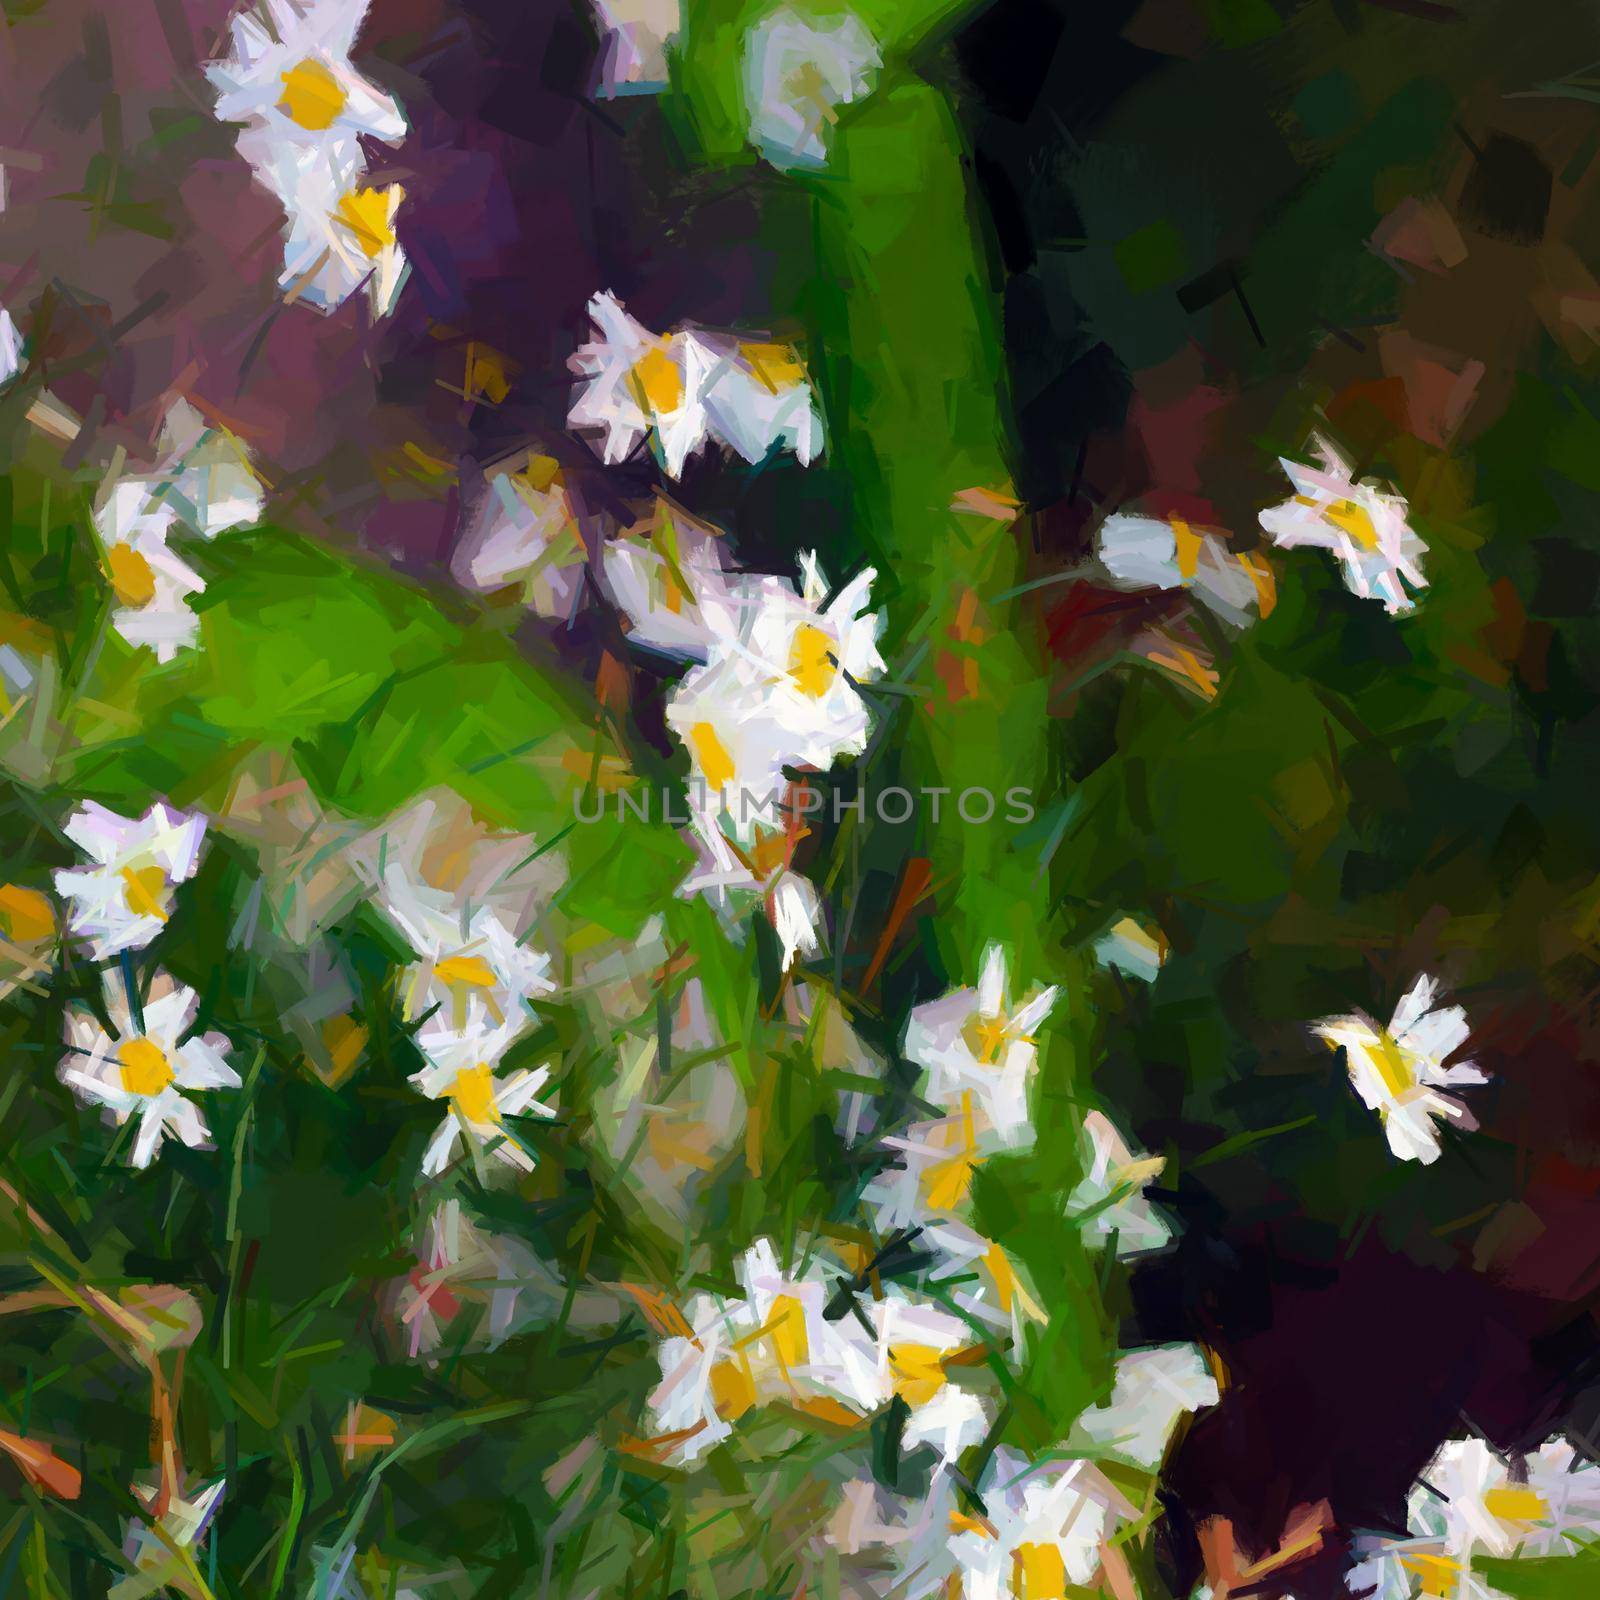 Daisies floral composition by Lirch